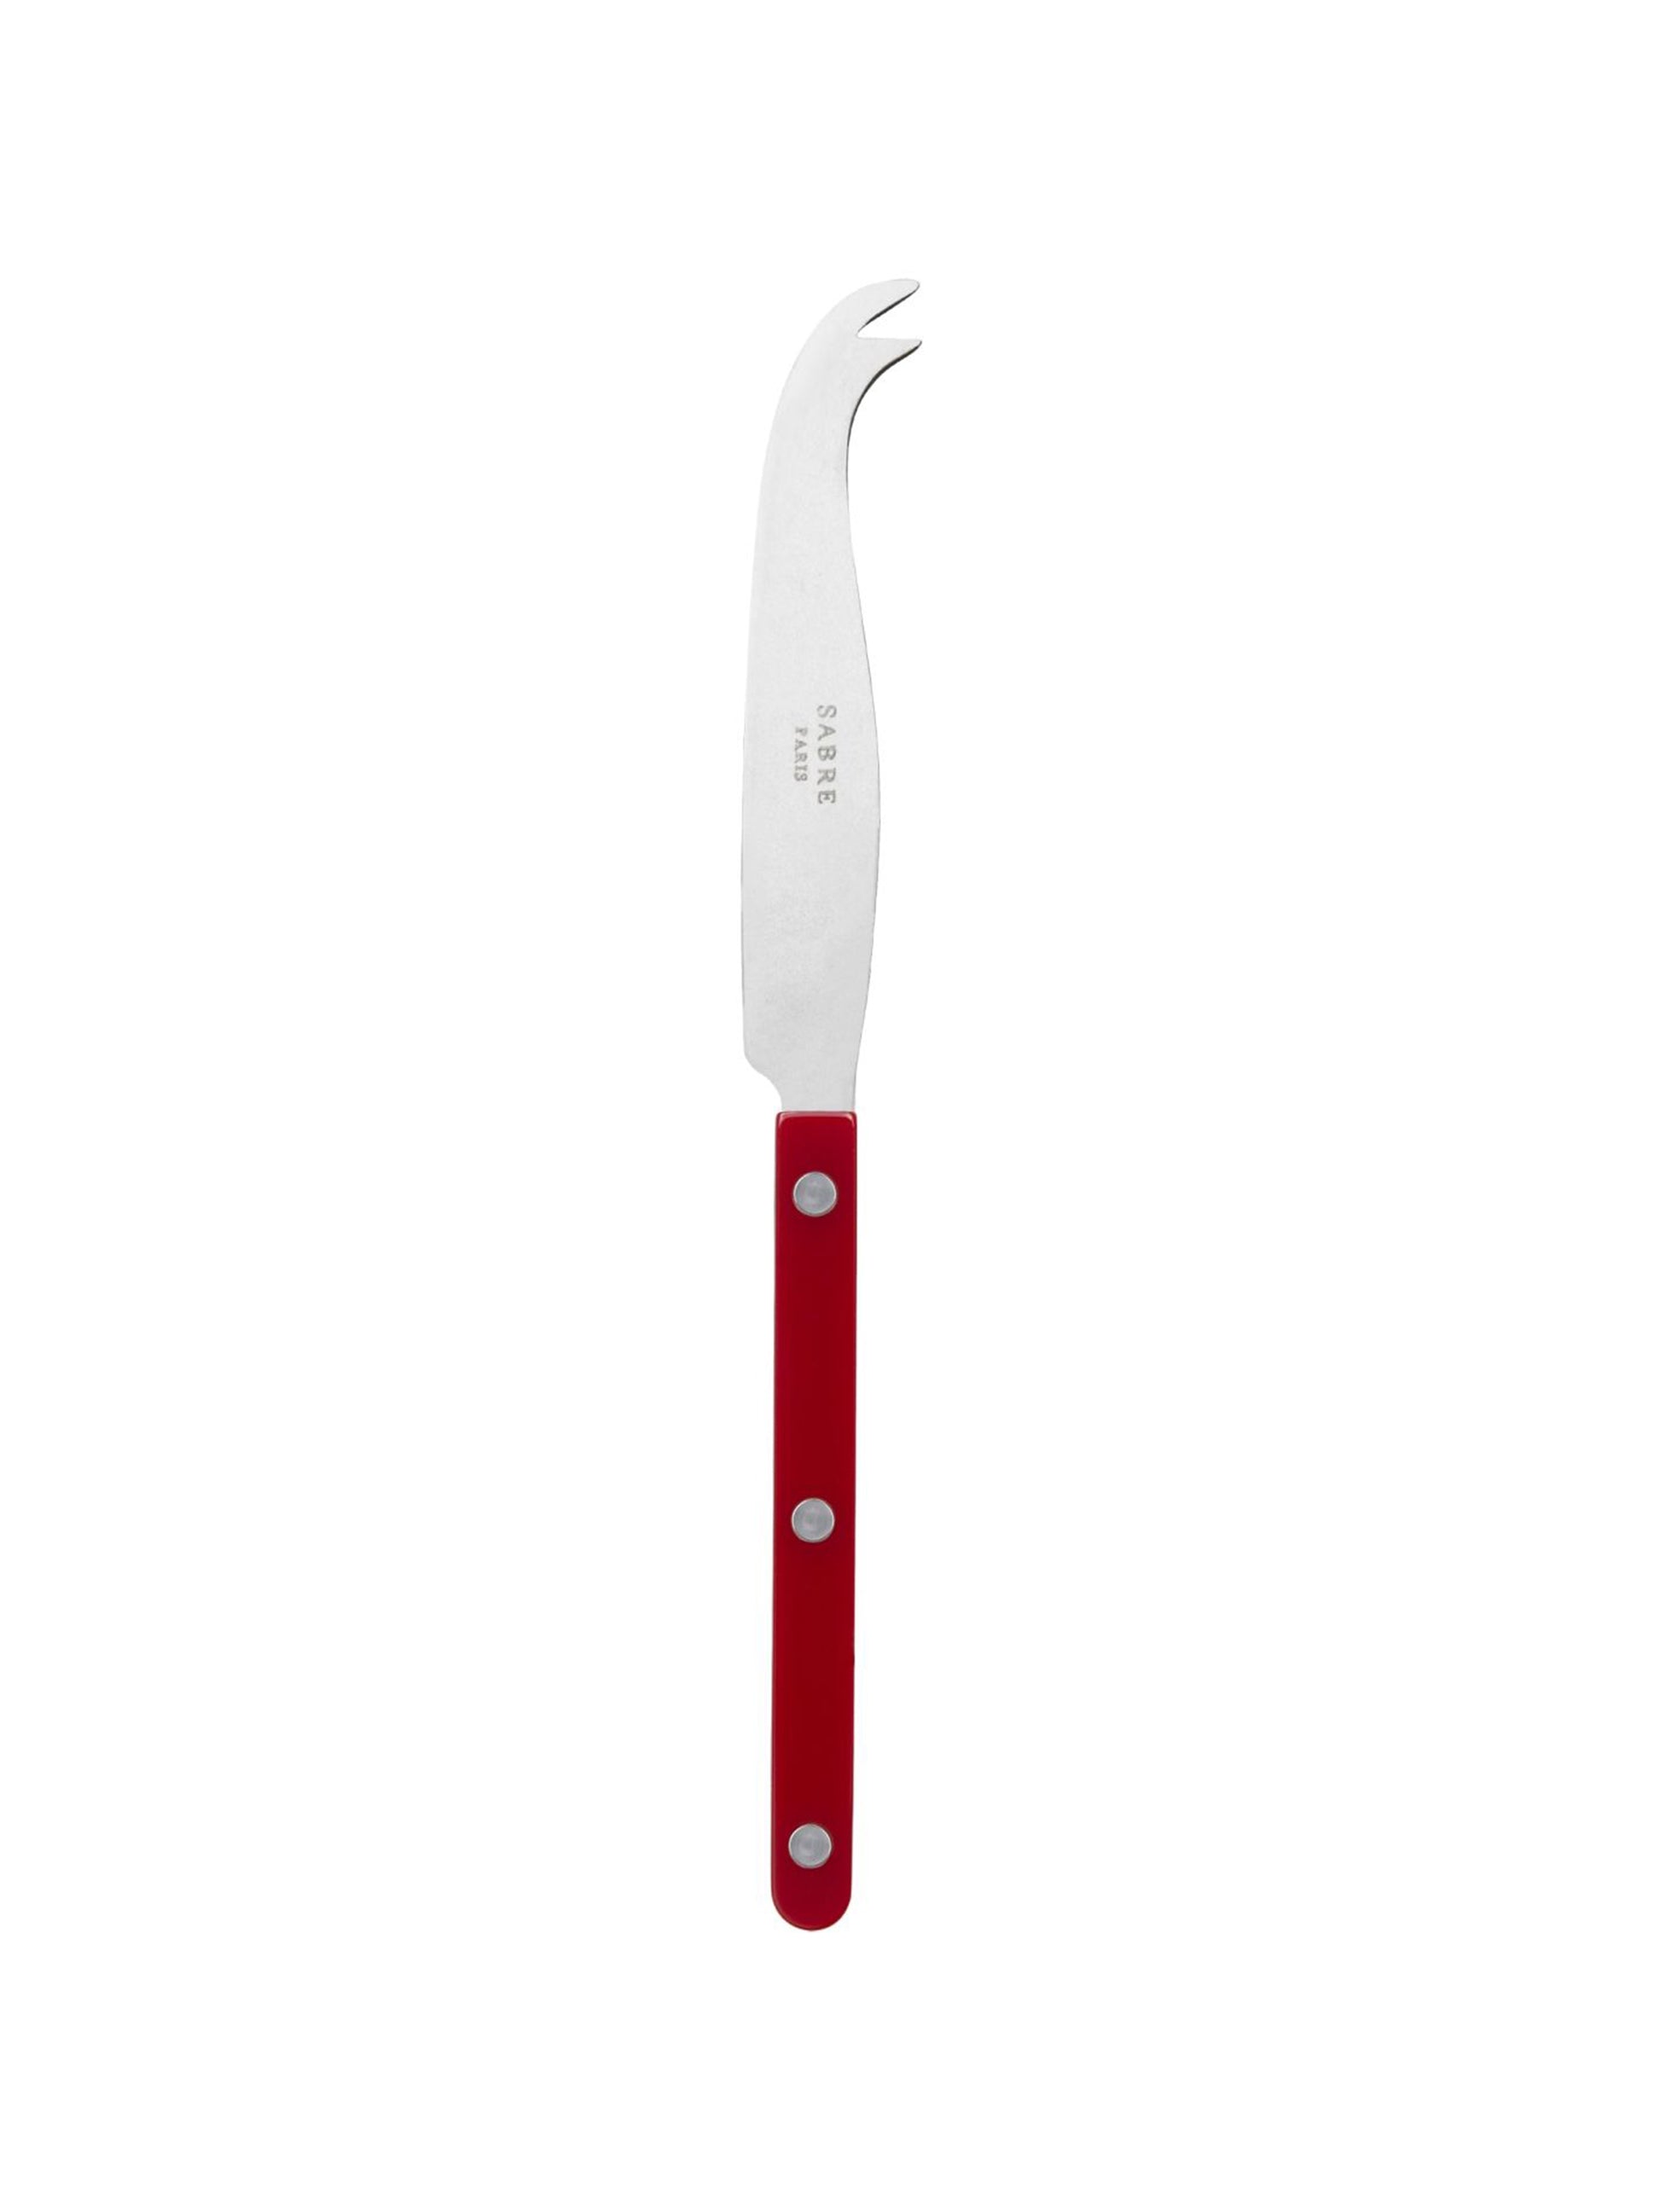 Sabre Paris Bistro Red Cheese Knife Weston Table